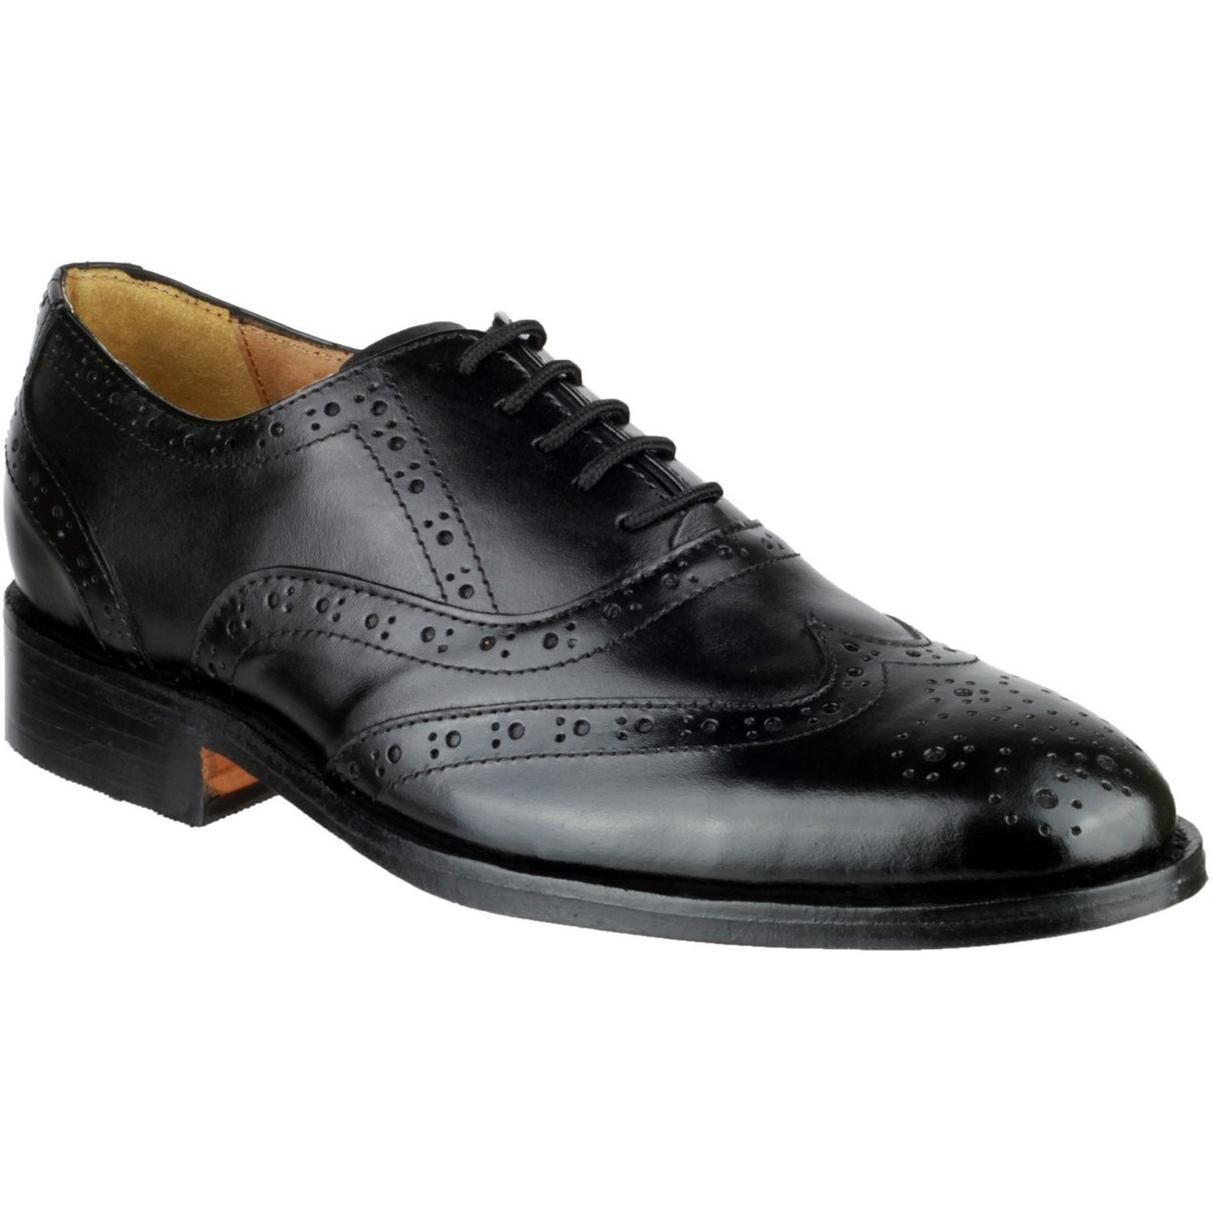 Amblers Ben Leather Soled Oxford Brogue Shoes